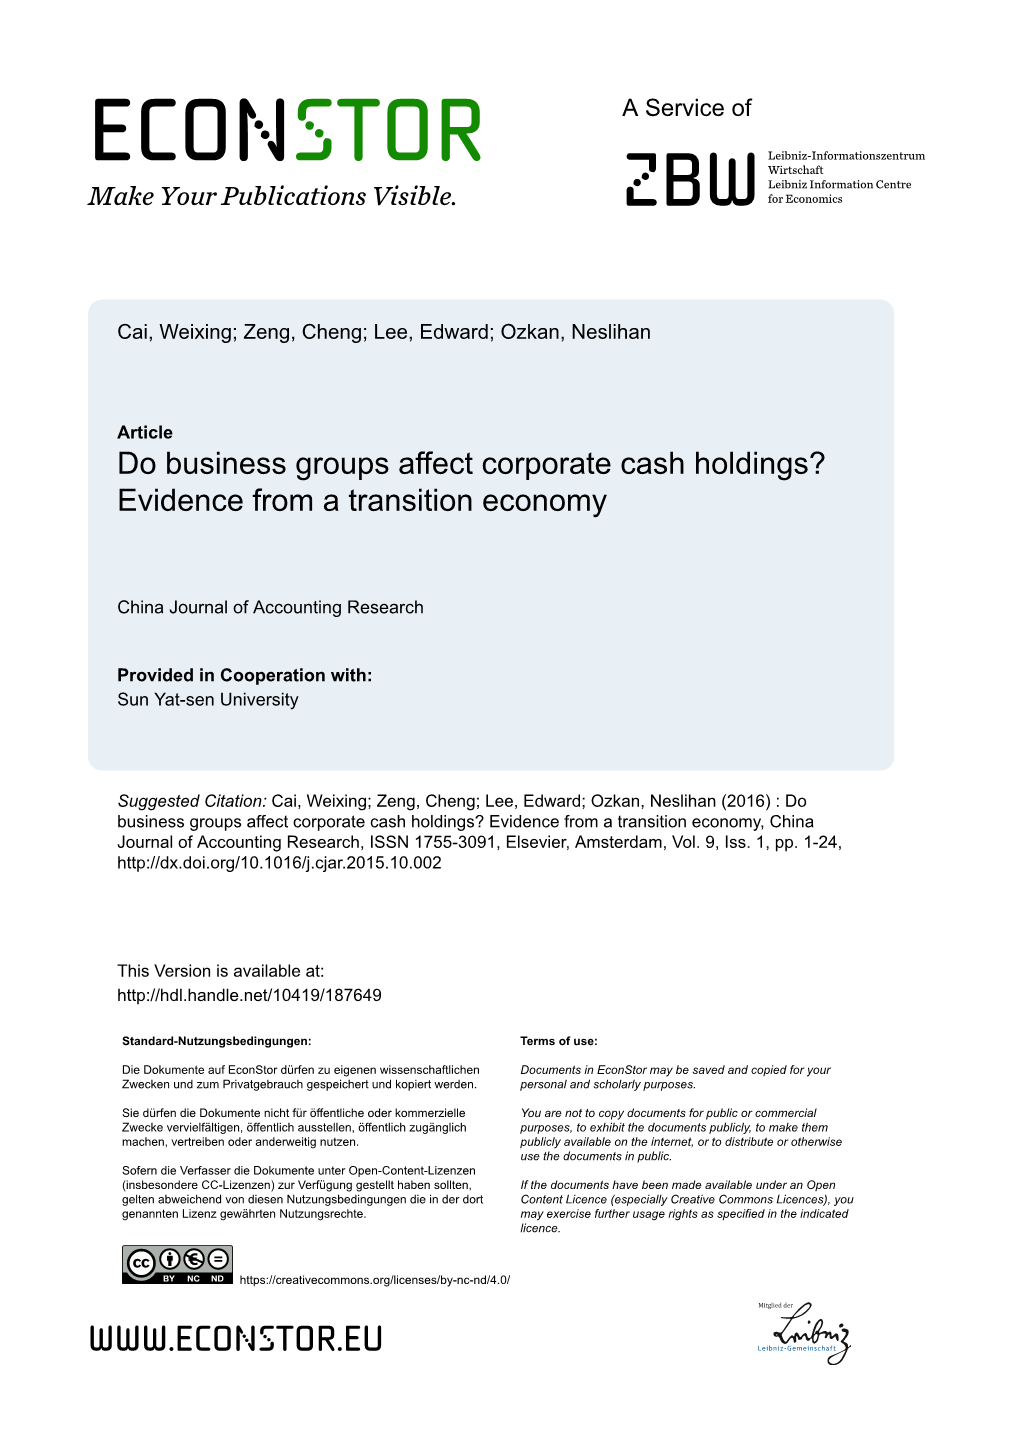 Do Business Groups Affect Corporate Cash Holdings? Evidence from a Transition Economy